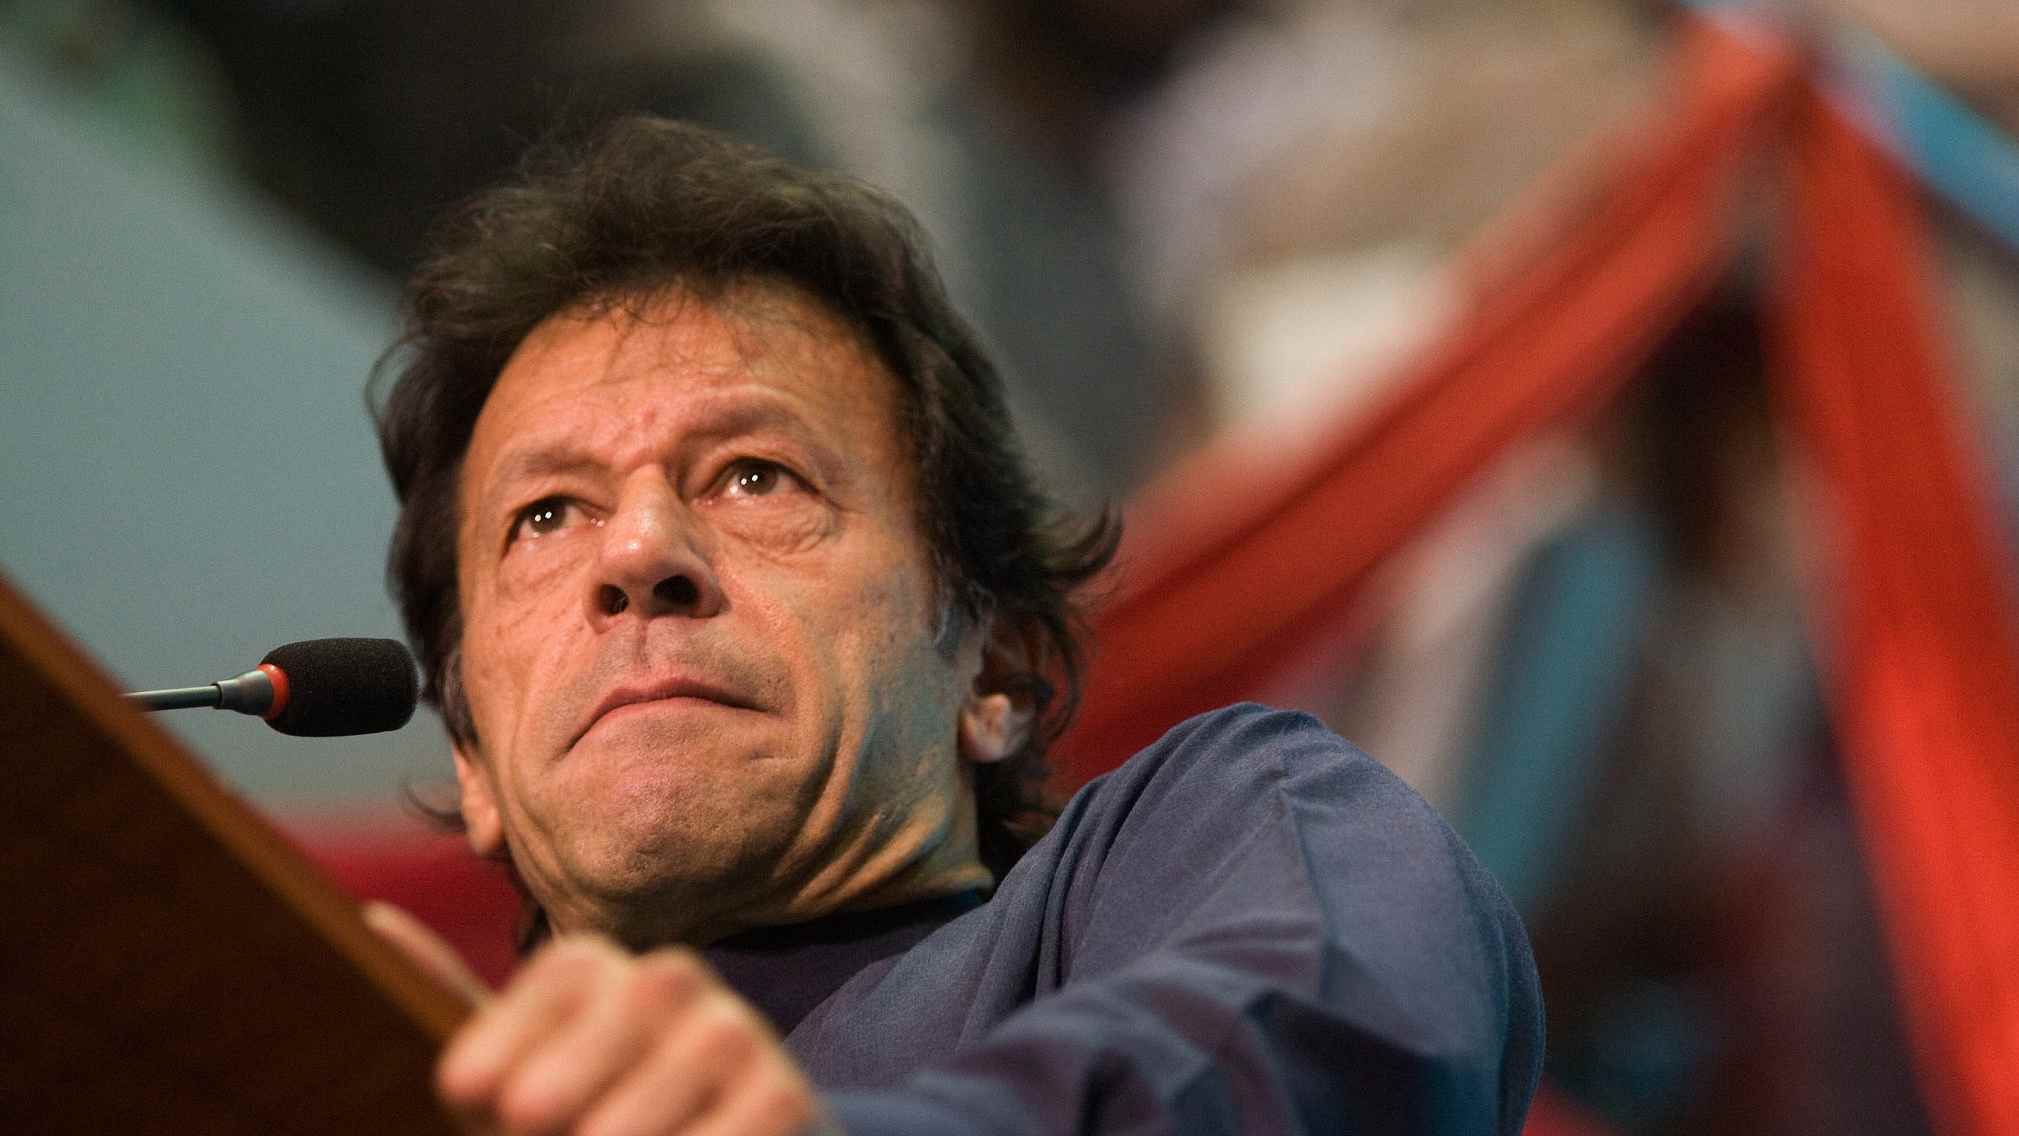 PTI Founder Imran Khan will not negotiate with anyone for power